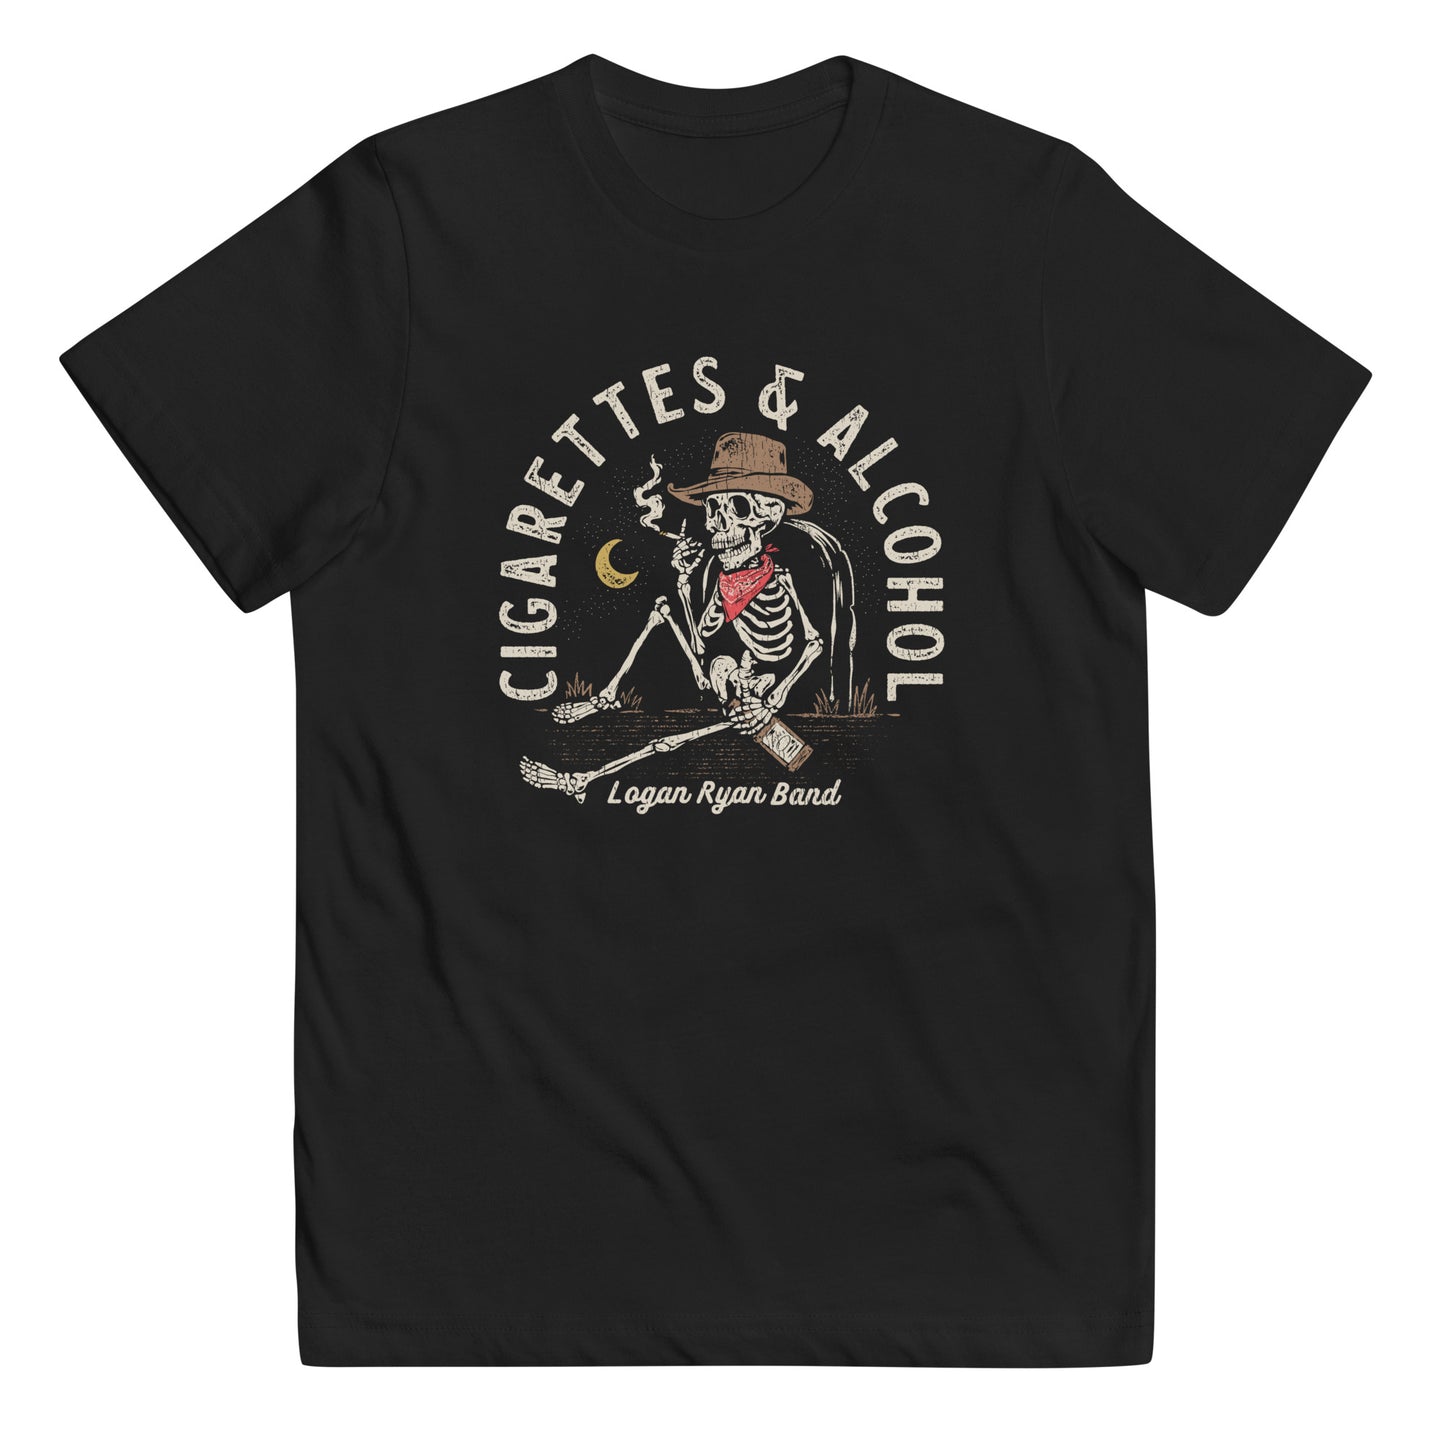 Cigarettes & Alcohol Youth t-shirt